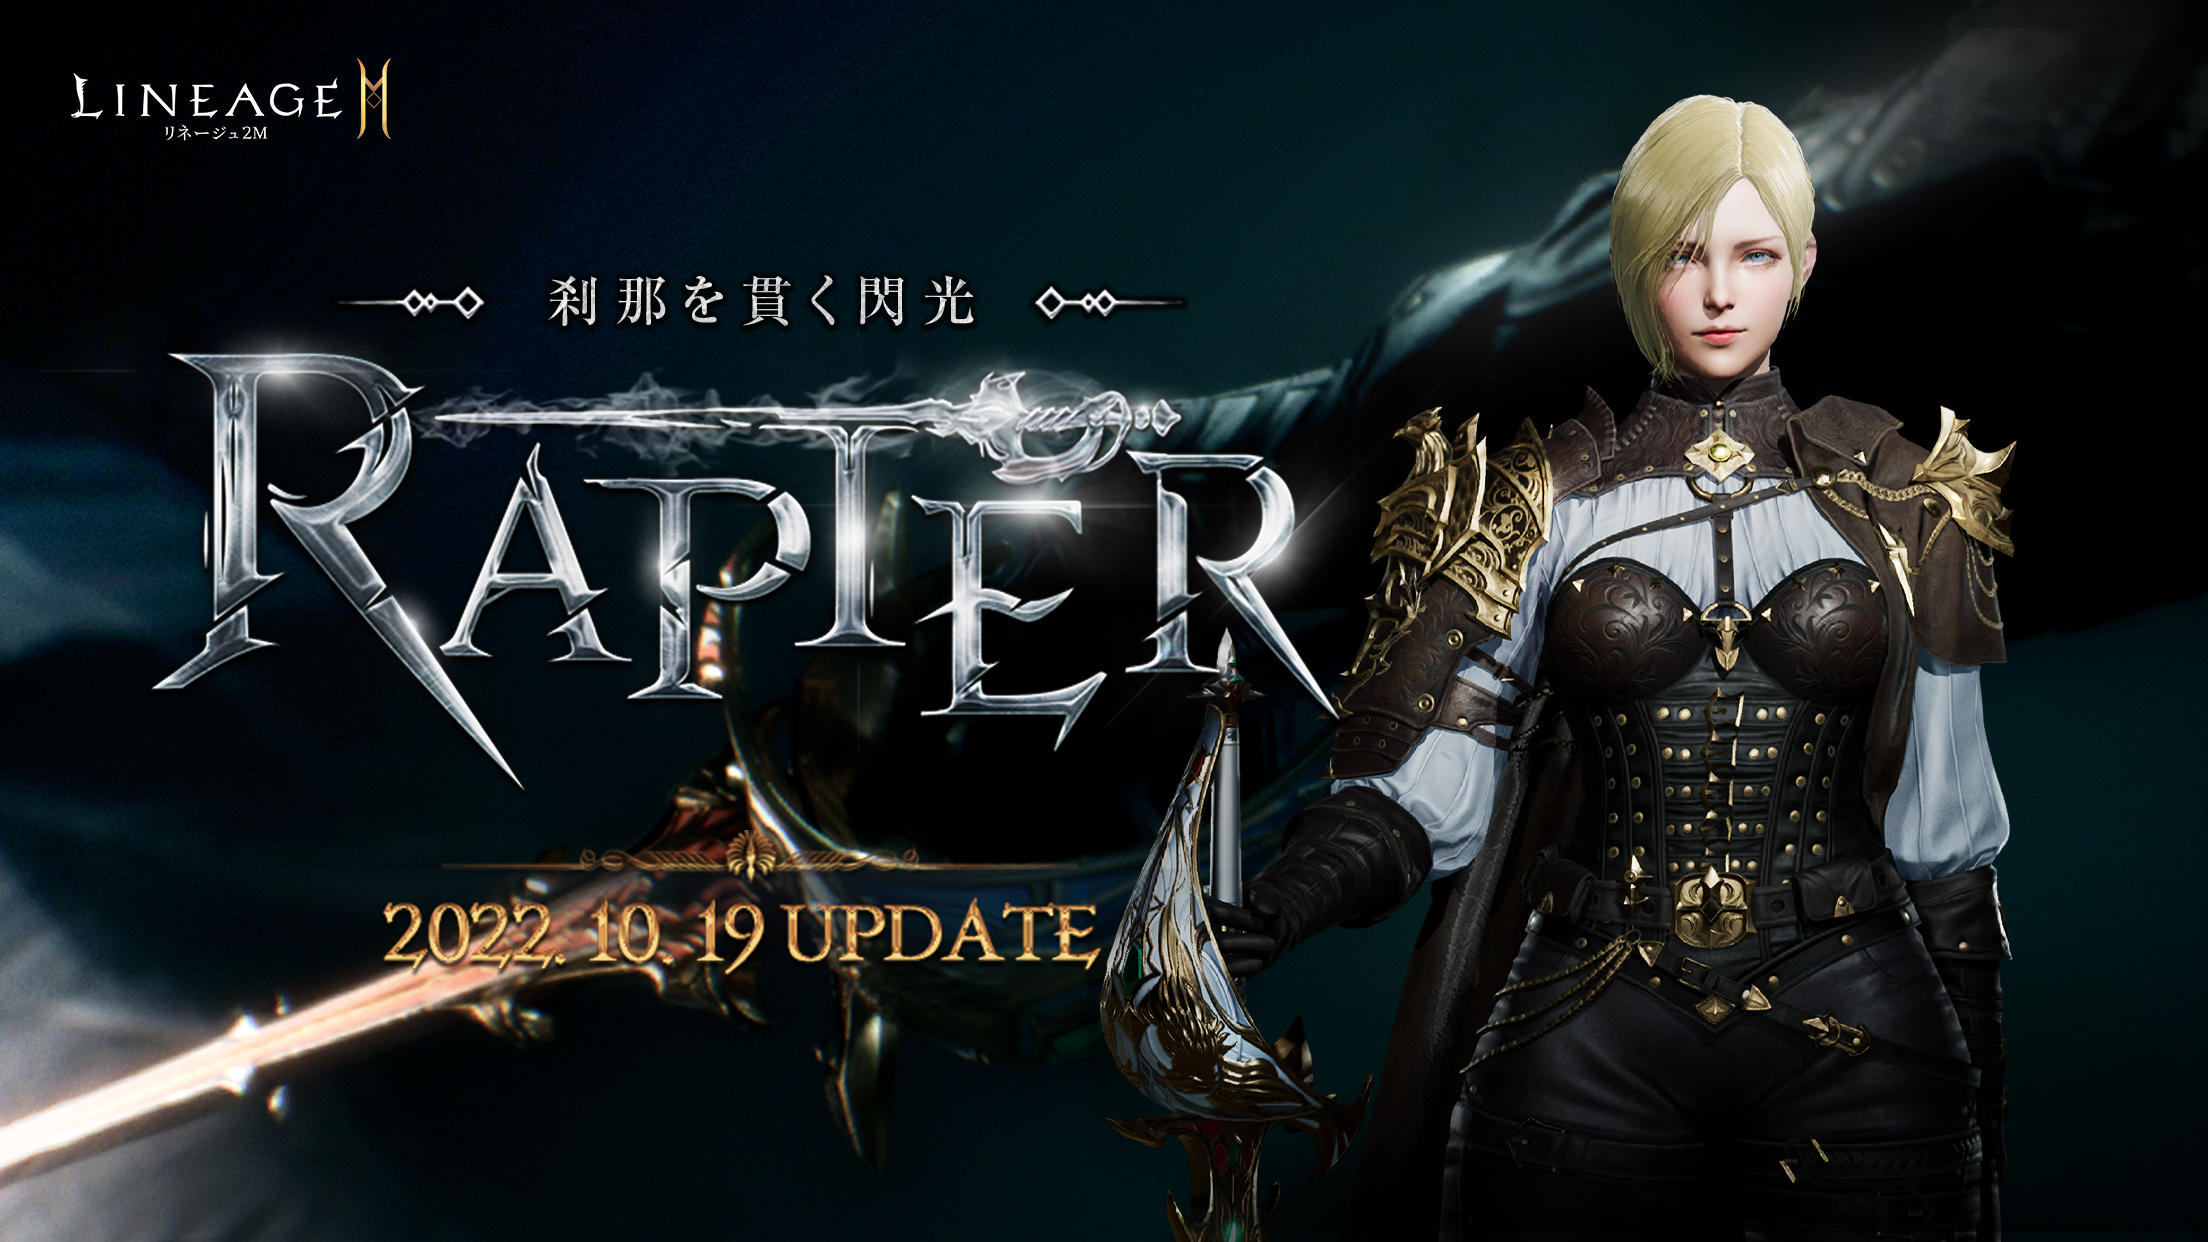 Screenshot 1 of Lineage 2M (Lineage2M) 